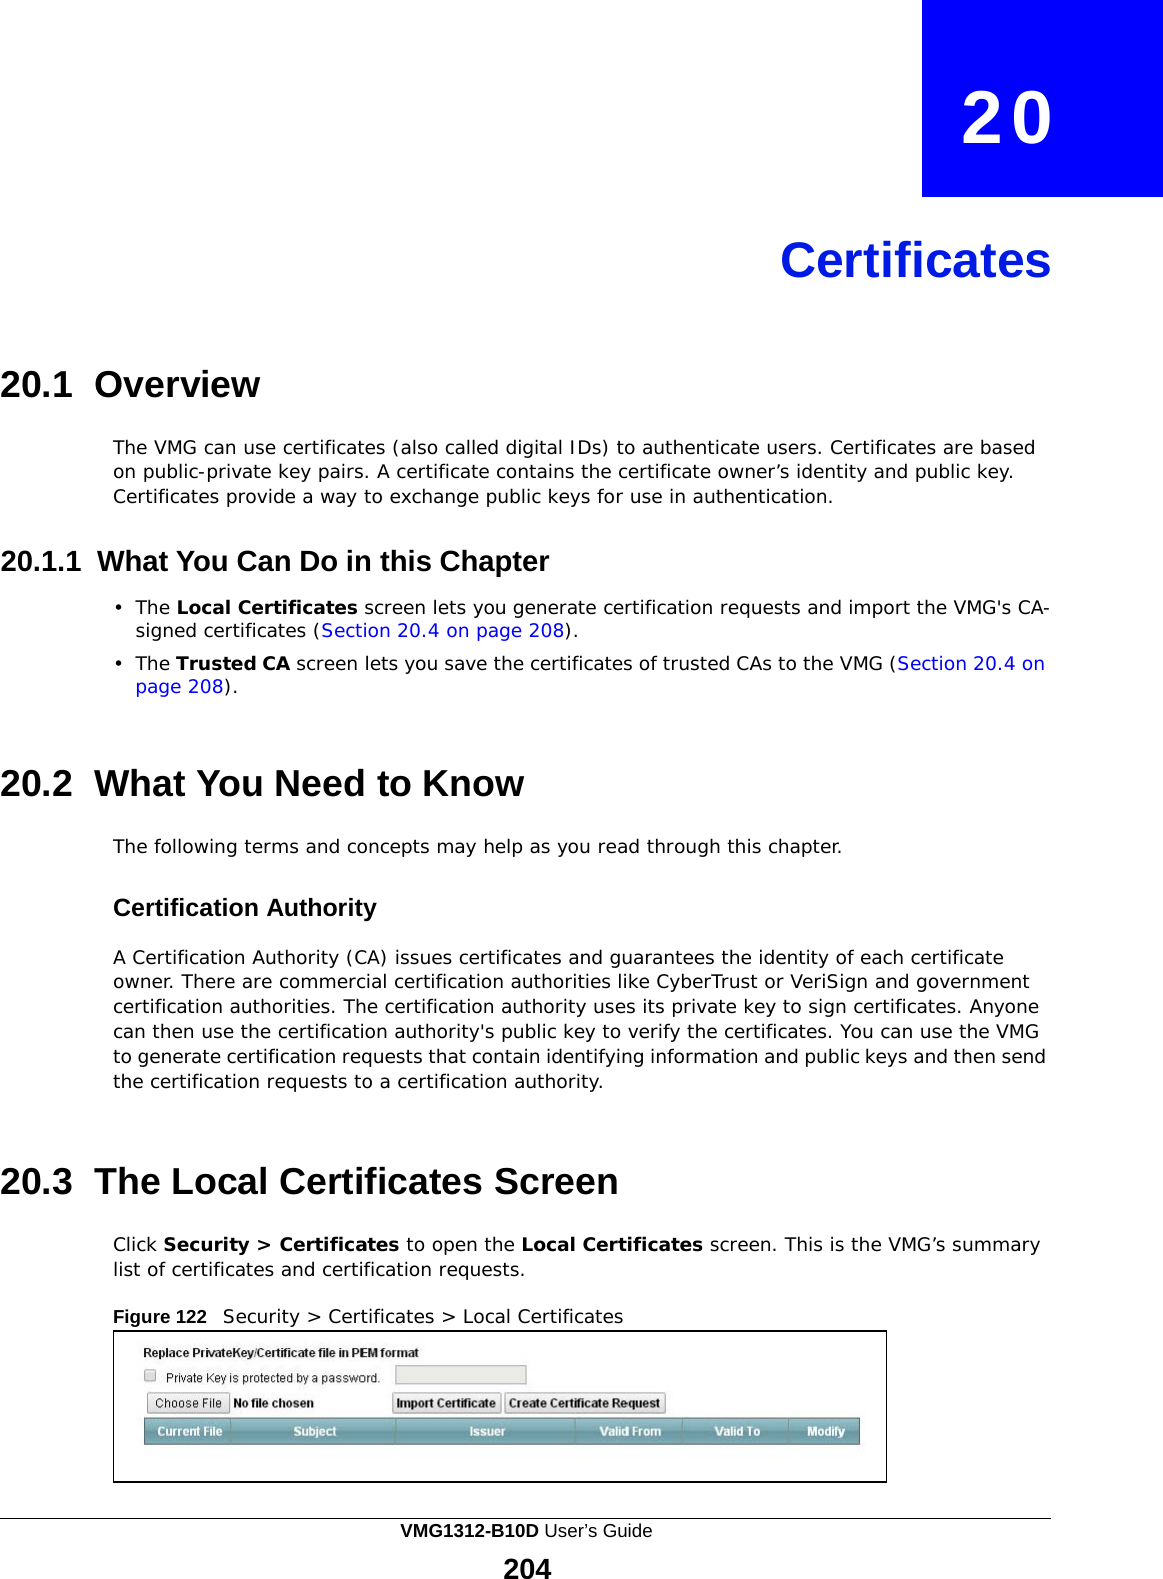    20     Certificates     20.1 Overview  The VMG can use certificates (also called digital IDs) to authenticate users. Certificates are based on public-private key pairs. A certificate contains the certificate owner’s identity and public key. Certificates provide a way to exchange public keys for use in authentication.   20.1.1 What You Can Do in this Chapter  •  The Local Certificates screen lets you generate certification requests and import the VMG&apos;s CA- signed certificates (Section 20.4 on page 208).  •  The Trusted CA screen lets you save the certificates of trusted CAs to the VMG (Section 20.4 on page 208).    20.2 What You Need to Know  The following terms and concepts may help as you read through this chapter.   Certification Authority  A Certification Authority (CA) issues certificates and guarantees the identity of each certificate owner. There are commercial certification authorities like CyberTrust or VeriSign and government certification authorities. The certification authority uses its private key to sign certificates. Anyone can then use the certification authority&apos;s public key to verify the certificates. You can use the VMG to generate certification requests that contain identifying information and public keys and then send the certification requests to a certification authority.    20.3  The Local Certificates Screen  Click Security &gt; Certificates to open the Local Certificates screen. This is the VMG’s summary list of certificates and certification requests.  Figure 122   Security &gt; Certificates &gt; Local Certificates VMG1312-B10D User’s Guide 204  